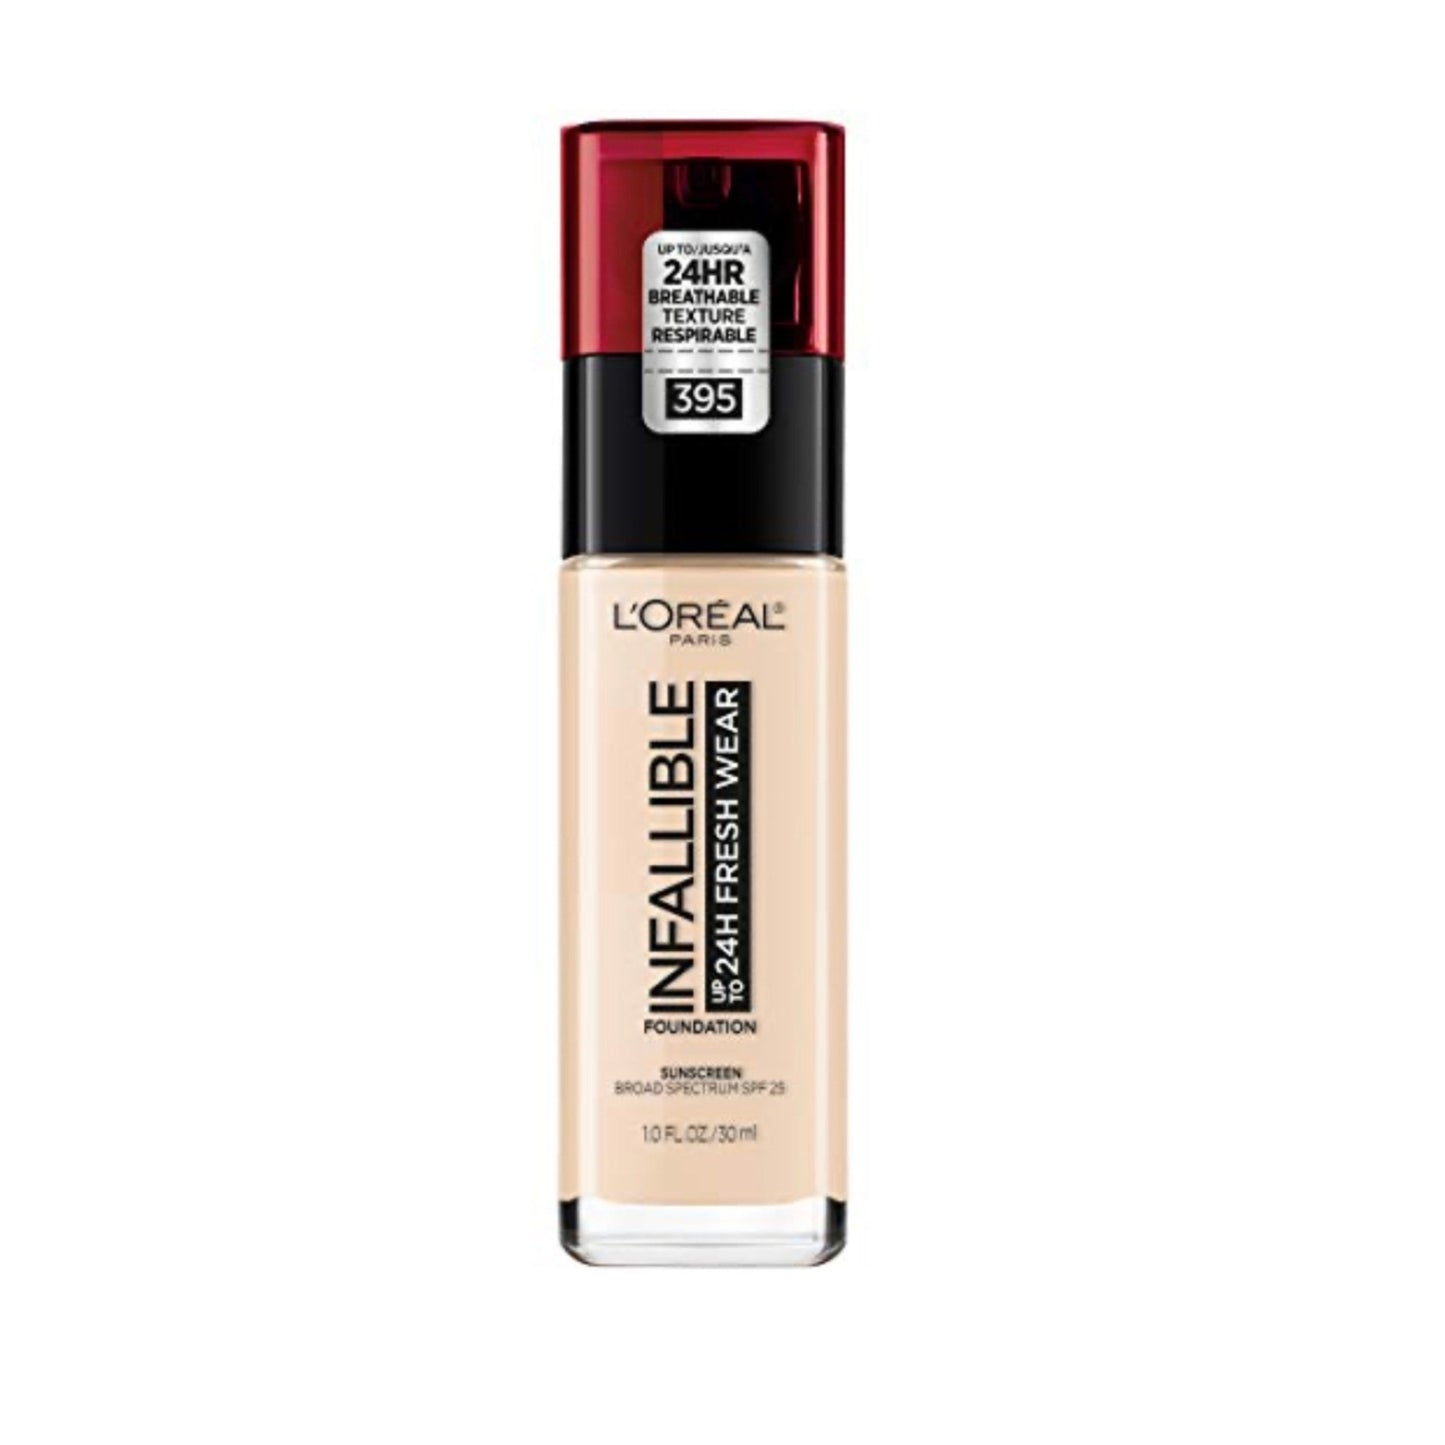 L'Oreal Paris Makeup Infallible Up to 24 Hour Fresh Wear Foundation, Rose Pearl, 1 Ounce